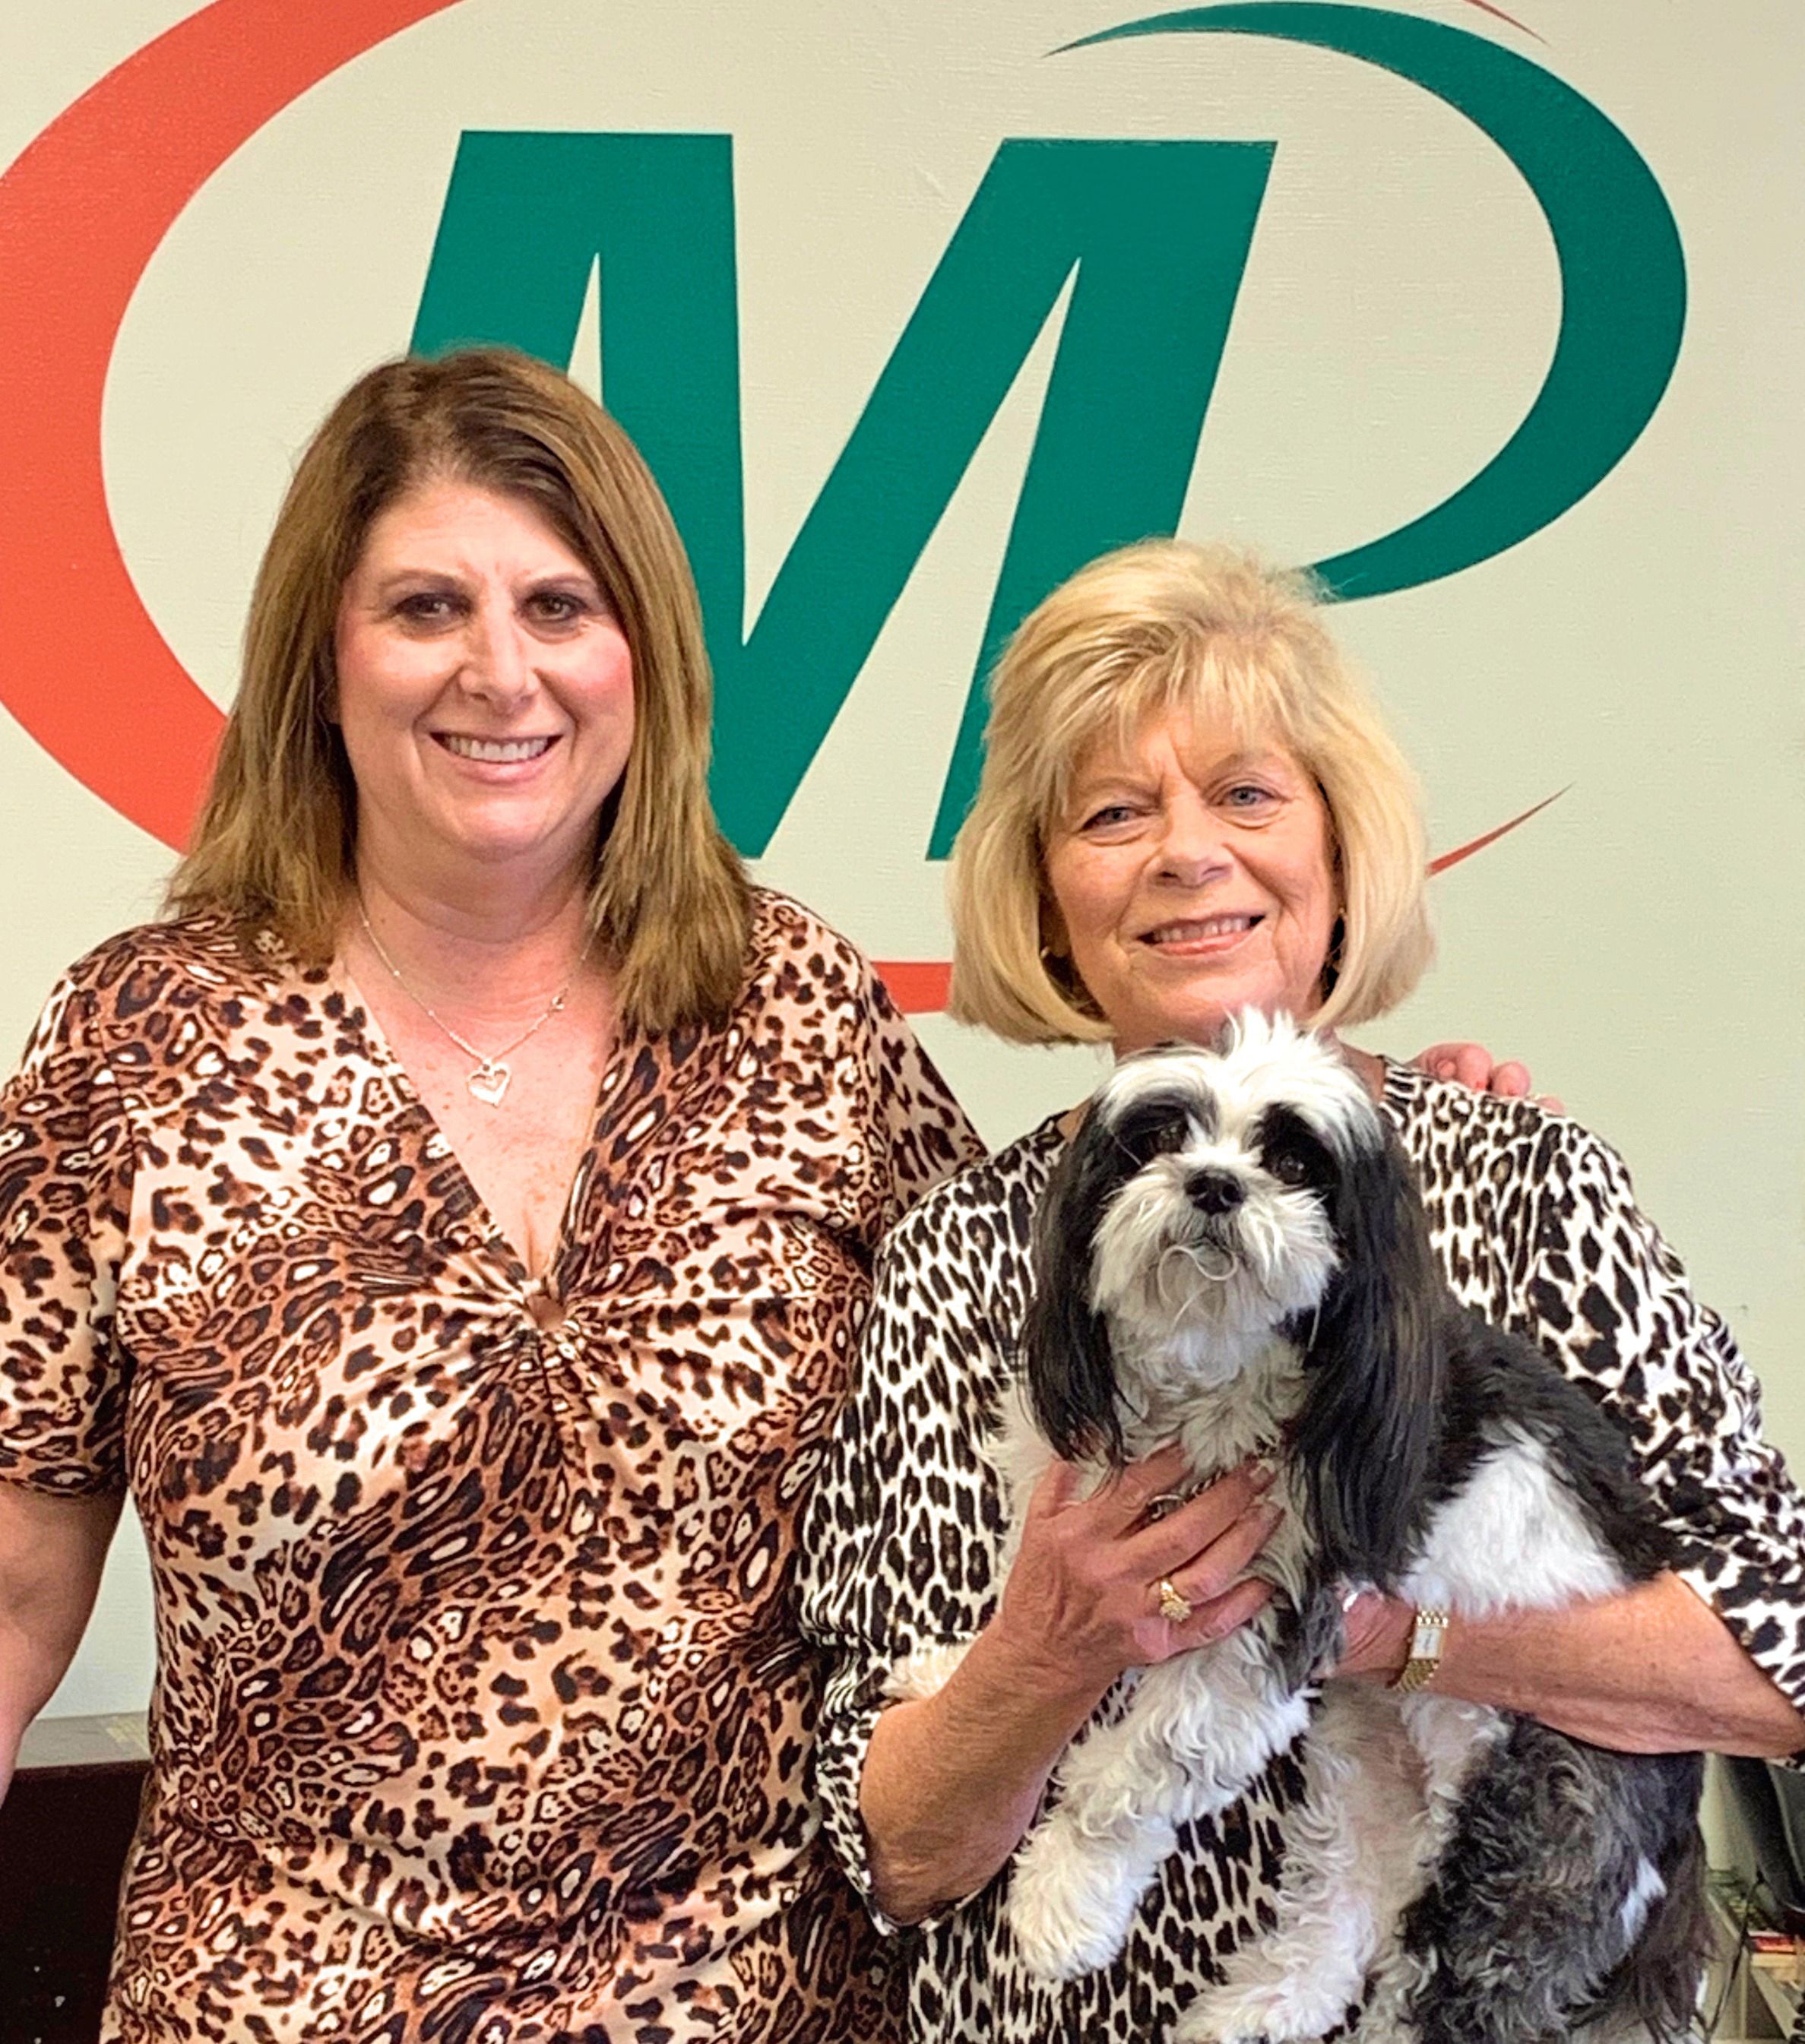 Dawn Little (left) and Phyllis Lynch (right) have owned the Minuteman Press printing franchise in Florence, Kentucky for 30 years and counting.